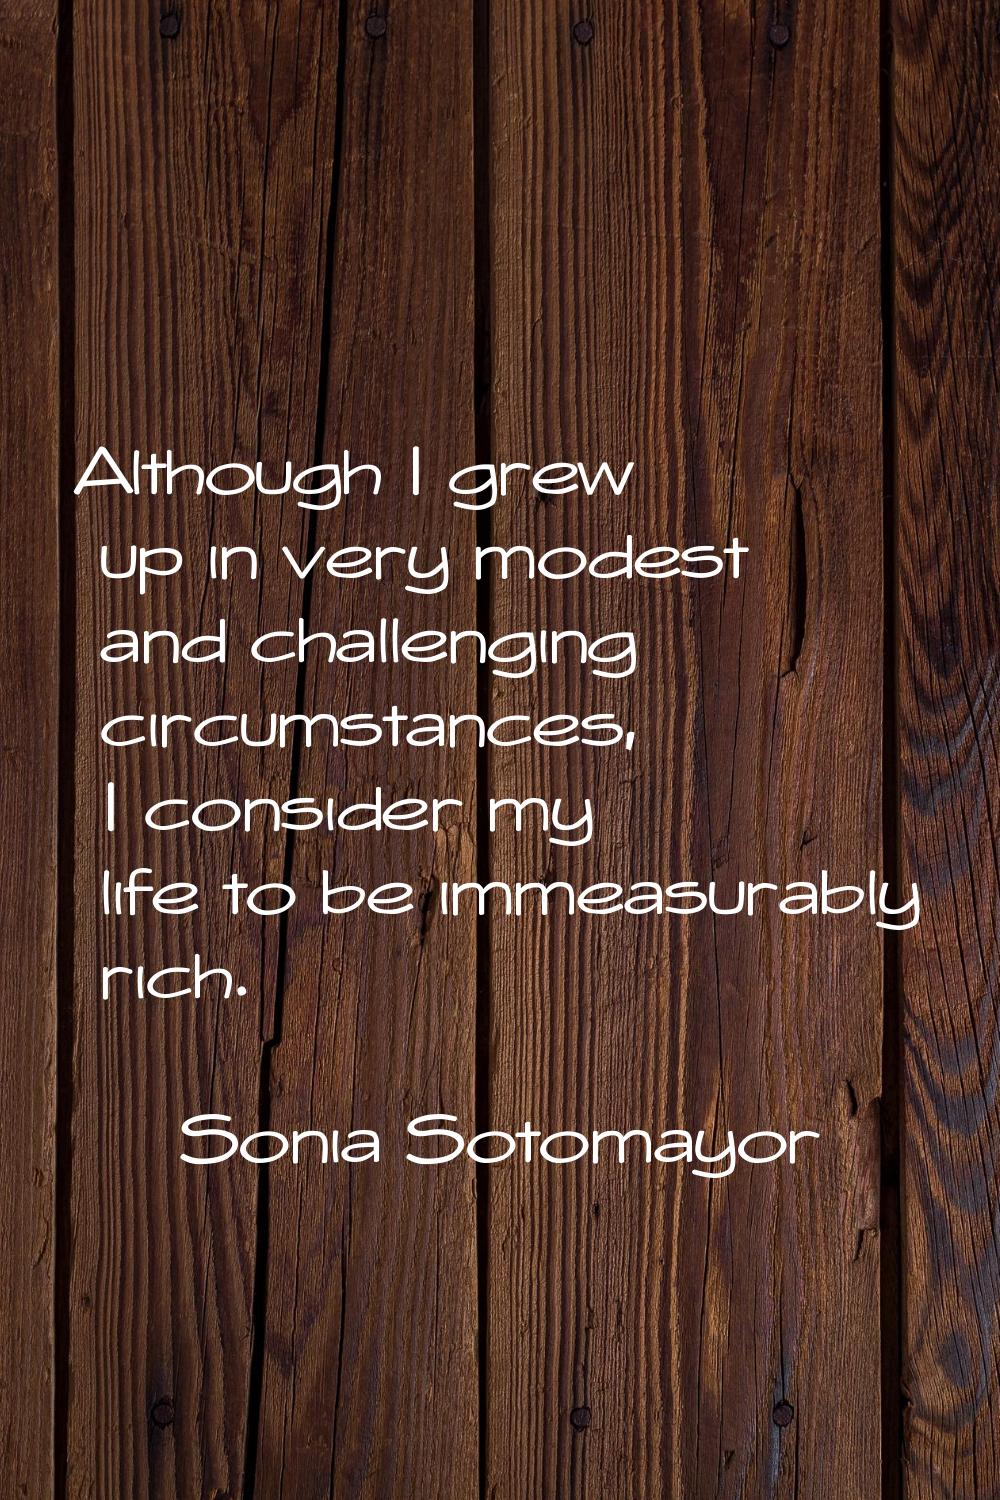 Although I grew up in very modest and challenging circumstances, I consider my life to be immeasura